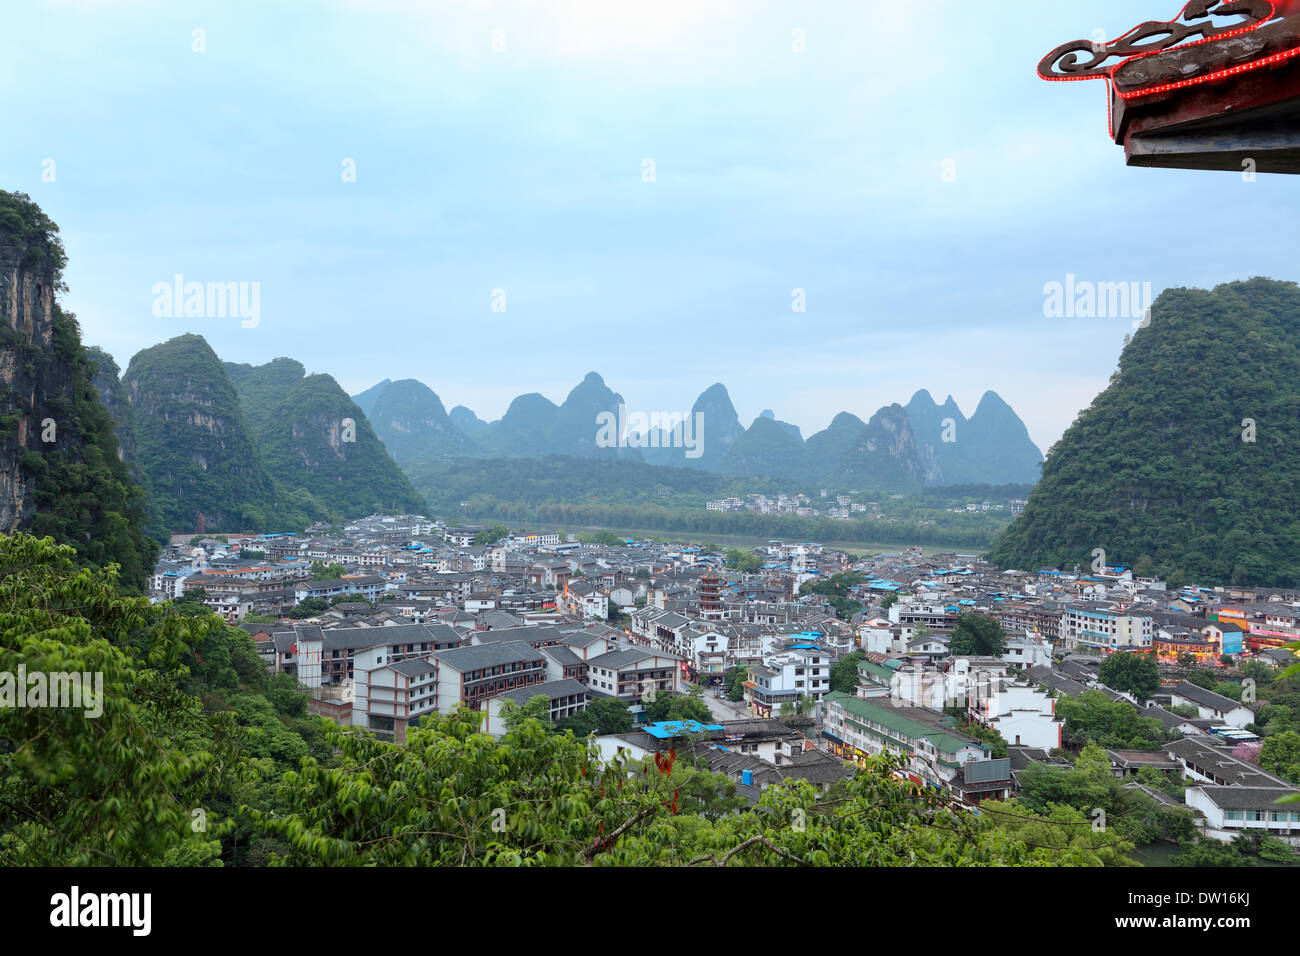 yangshuo county town at dusk Stock Photo